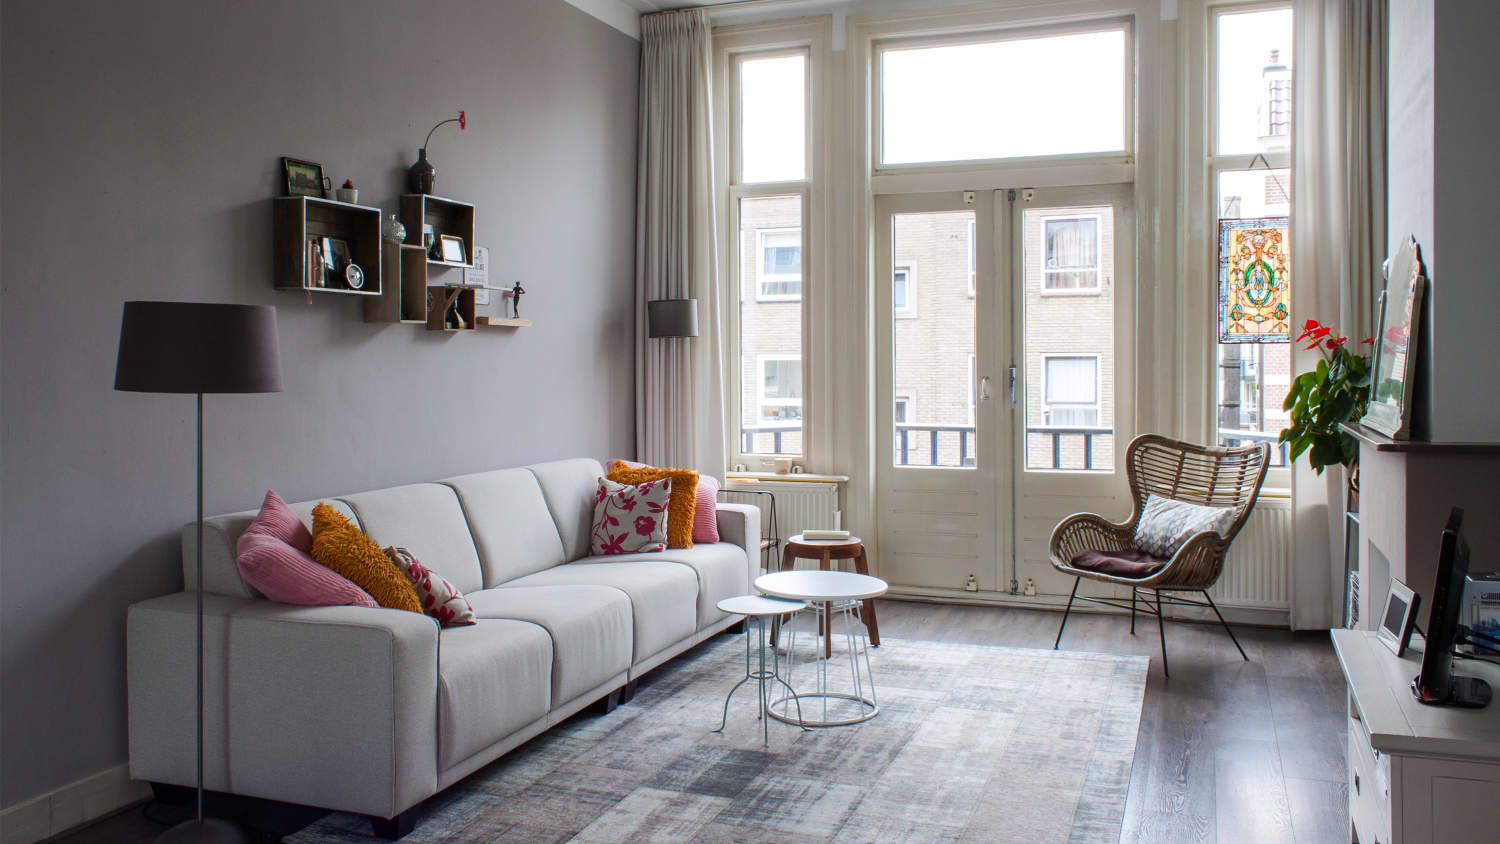 Setting the stage: inside an ever-changing Paris home